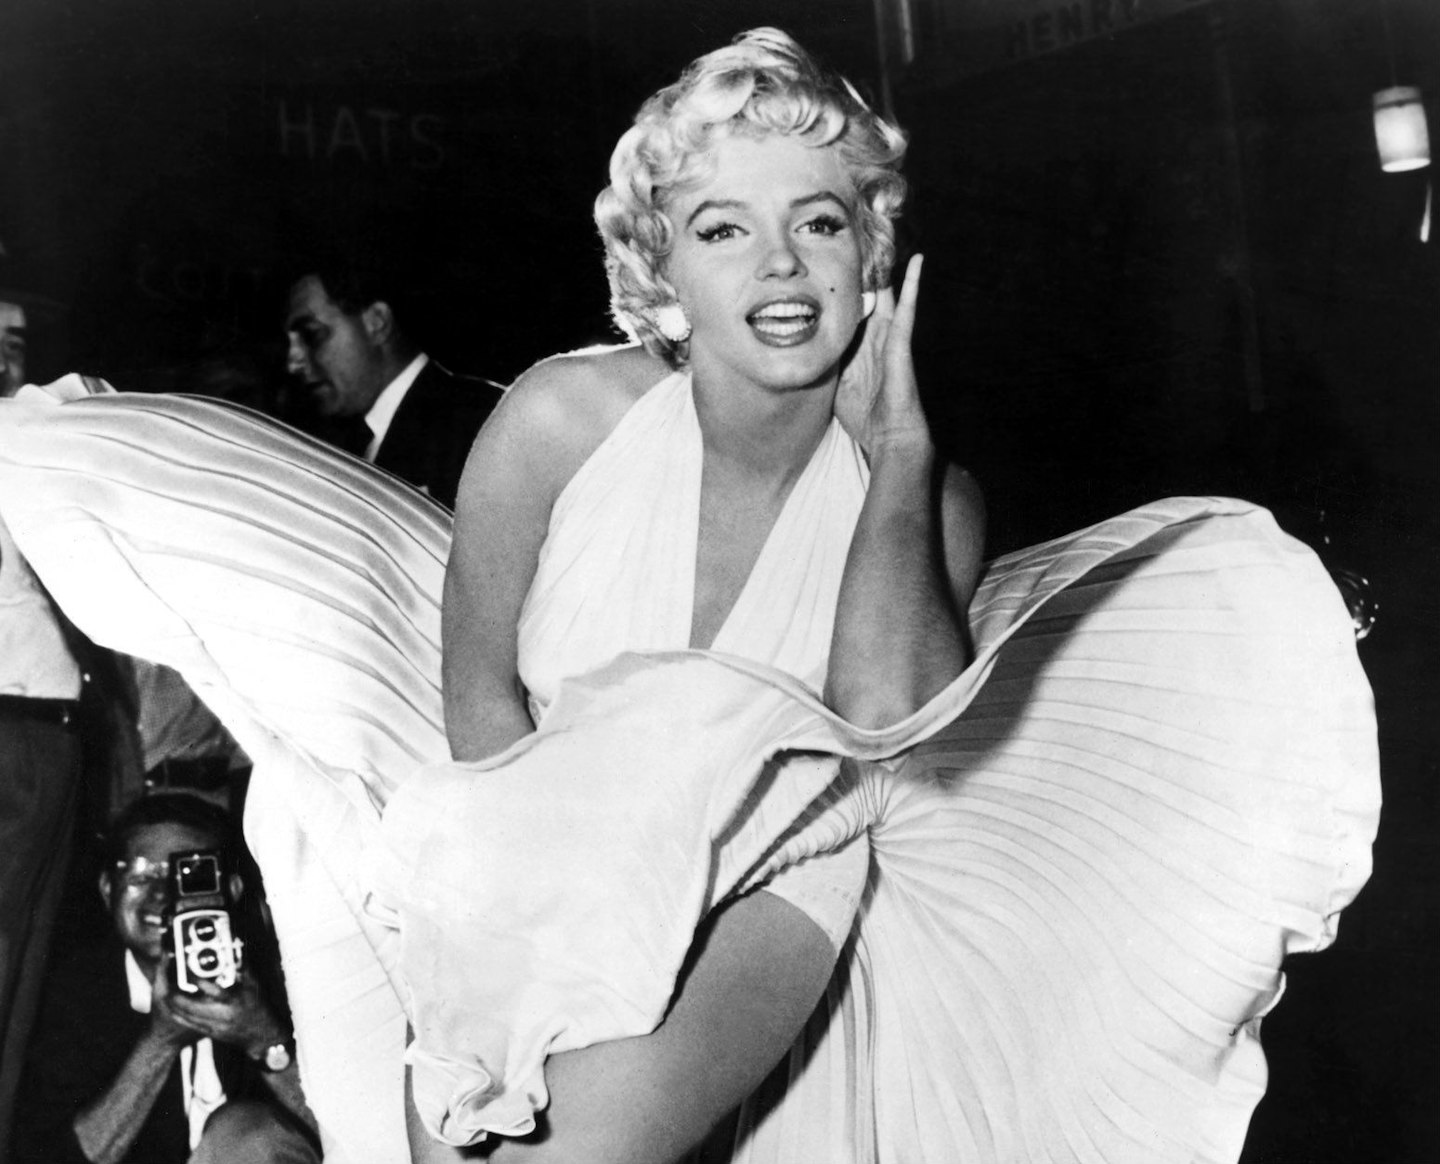 THE STORY OF: The Pink Dress Worn By Both Marilyn Monroe and